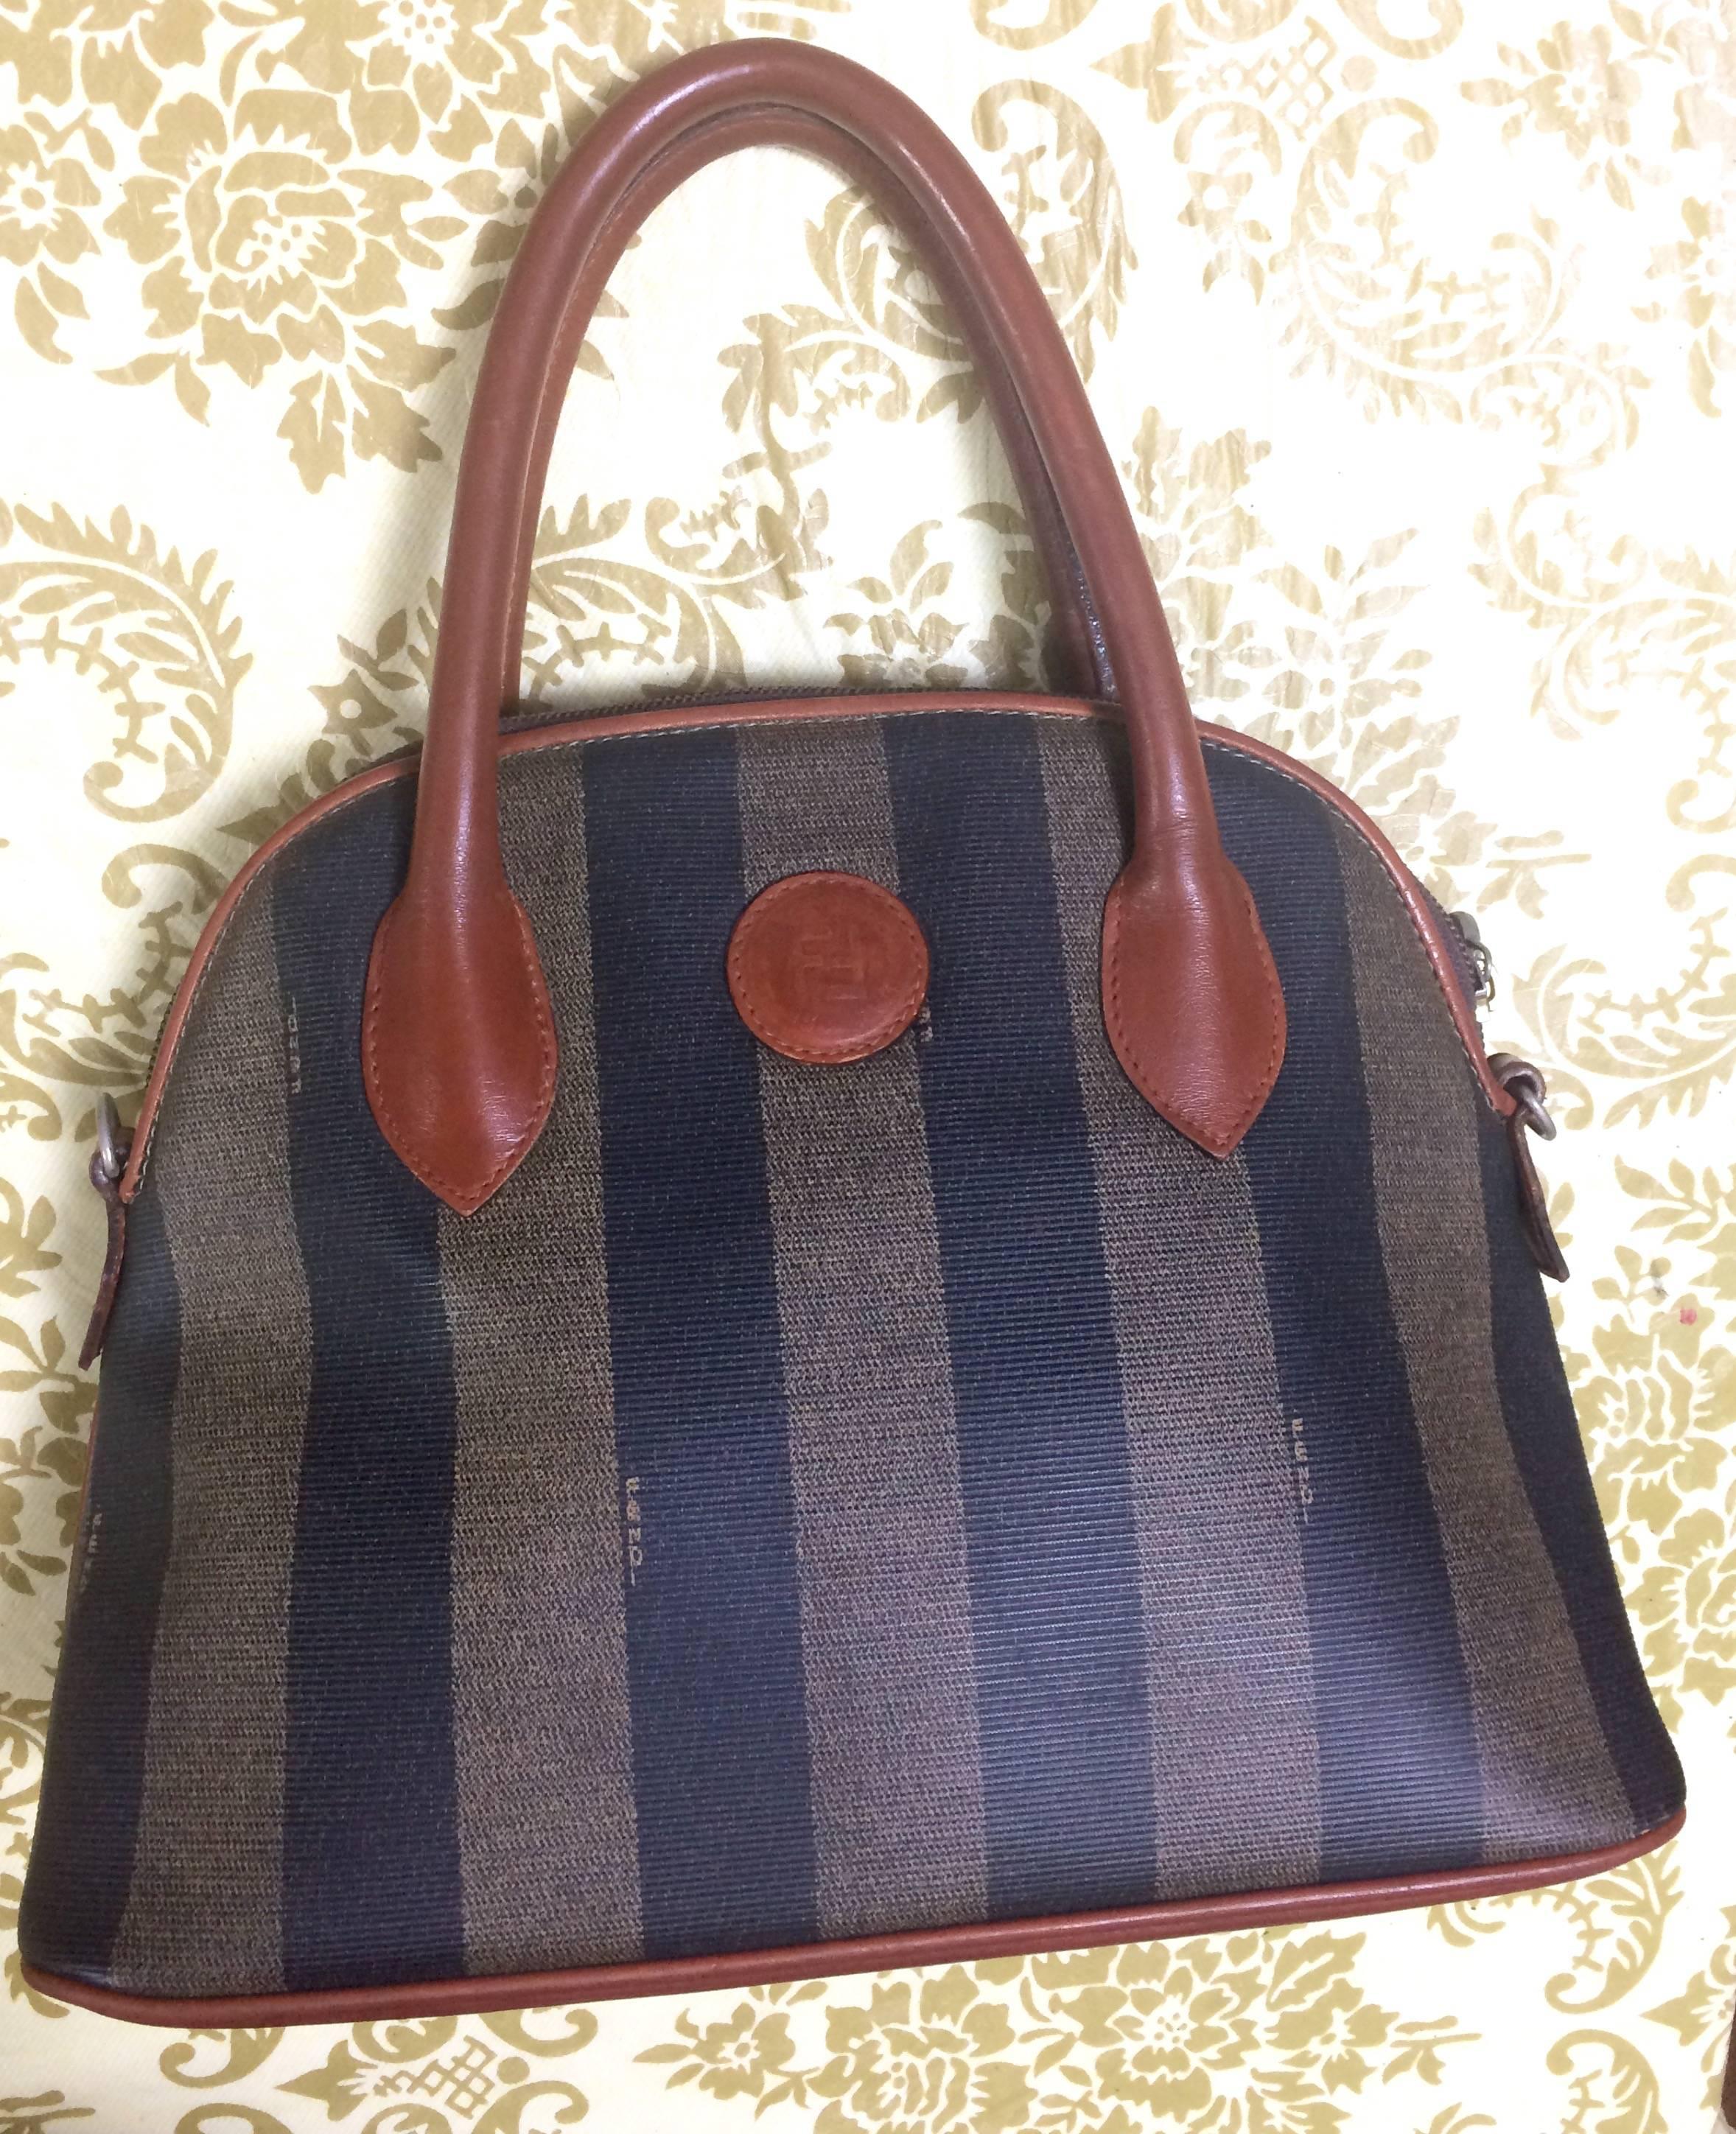 1980s-1990s. Vintage FENDI black and grey pecan stripe bag with brown leather handles and trimmings in bolide shape. Classic daily use purse. 

Here is another FENDI conic pecan pattern handbag in bolide shape from old era. 
Very classic and yet